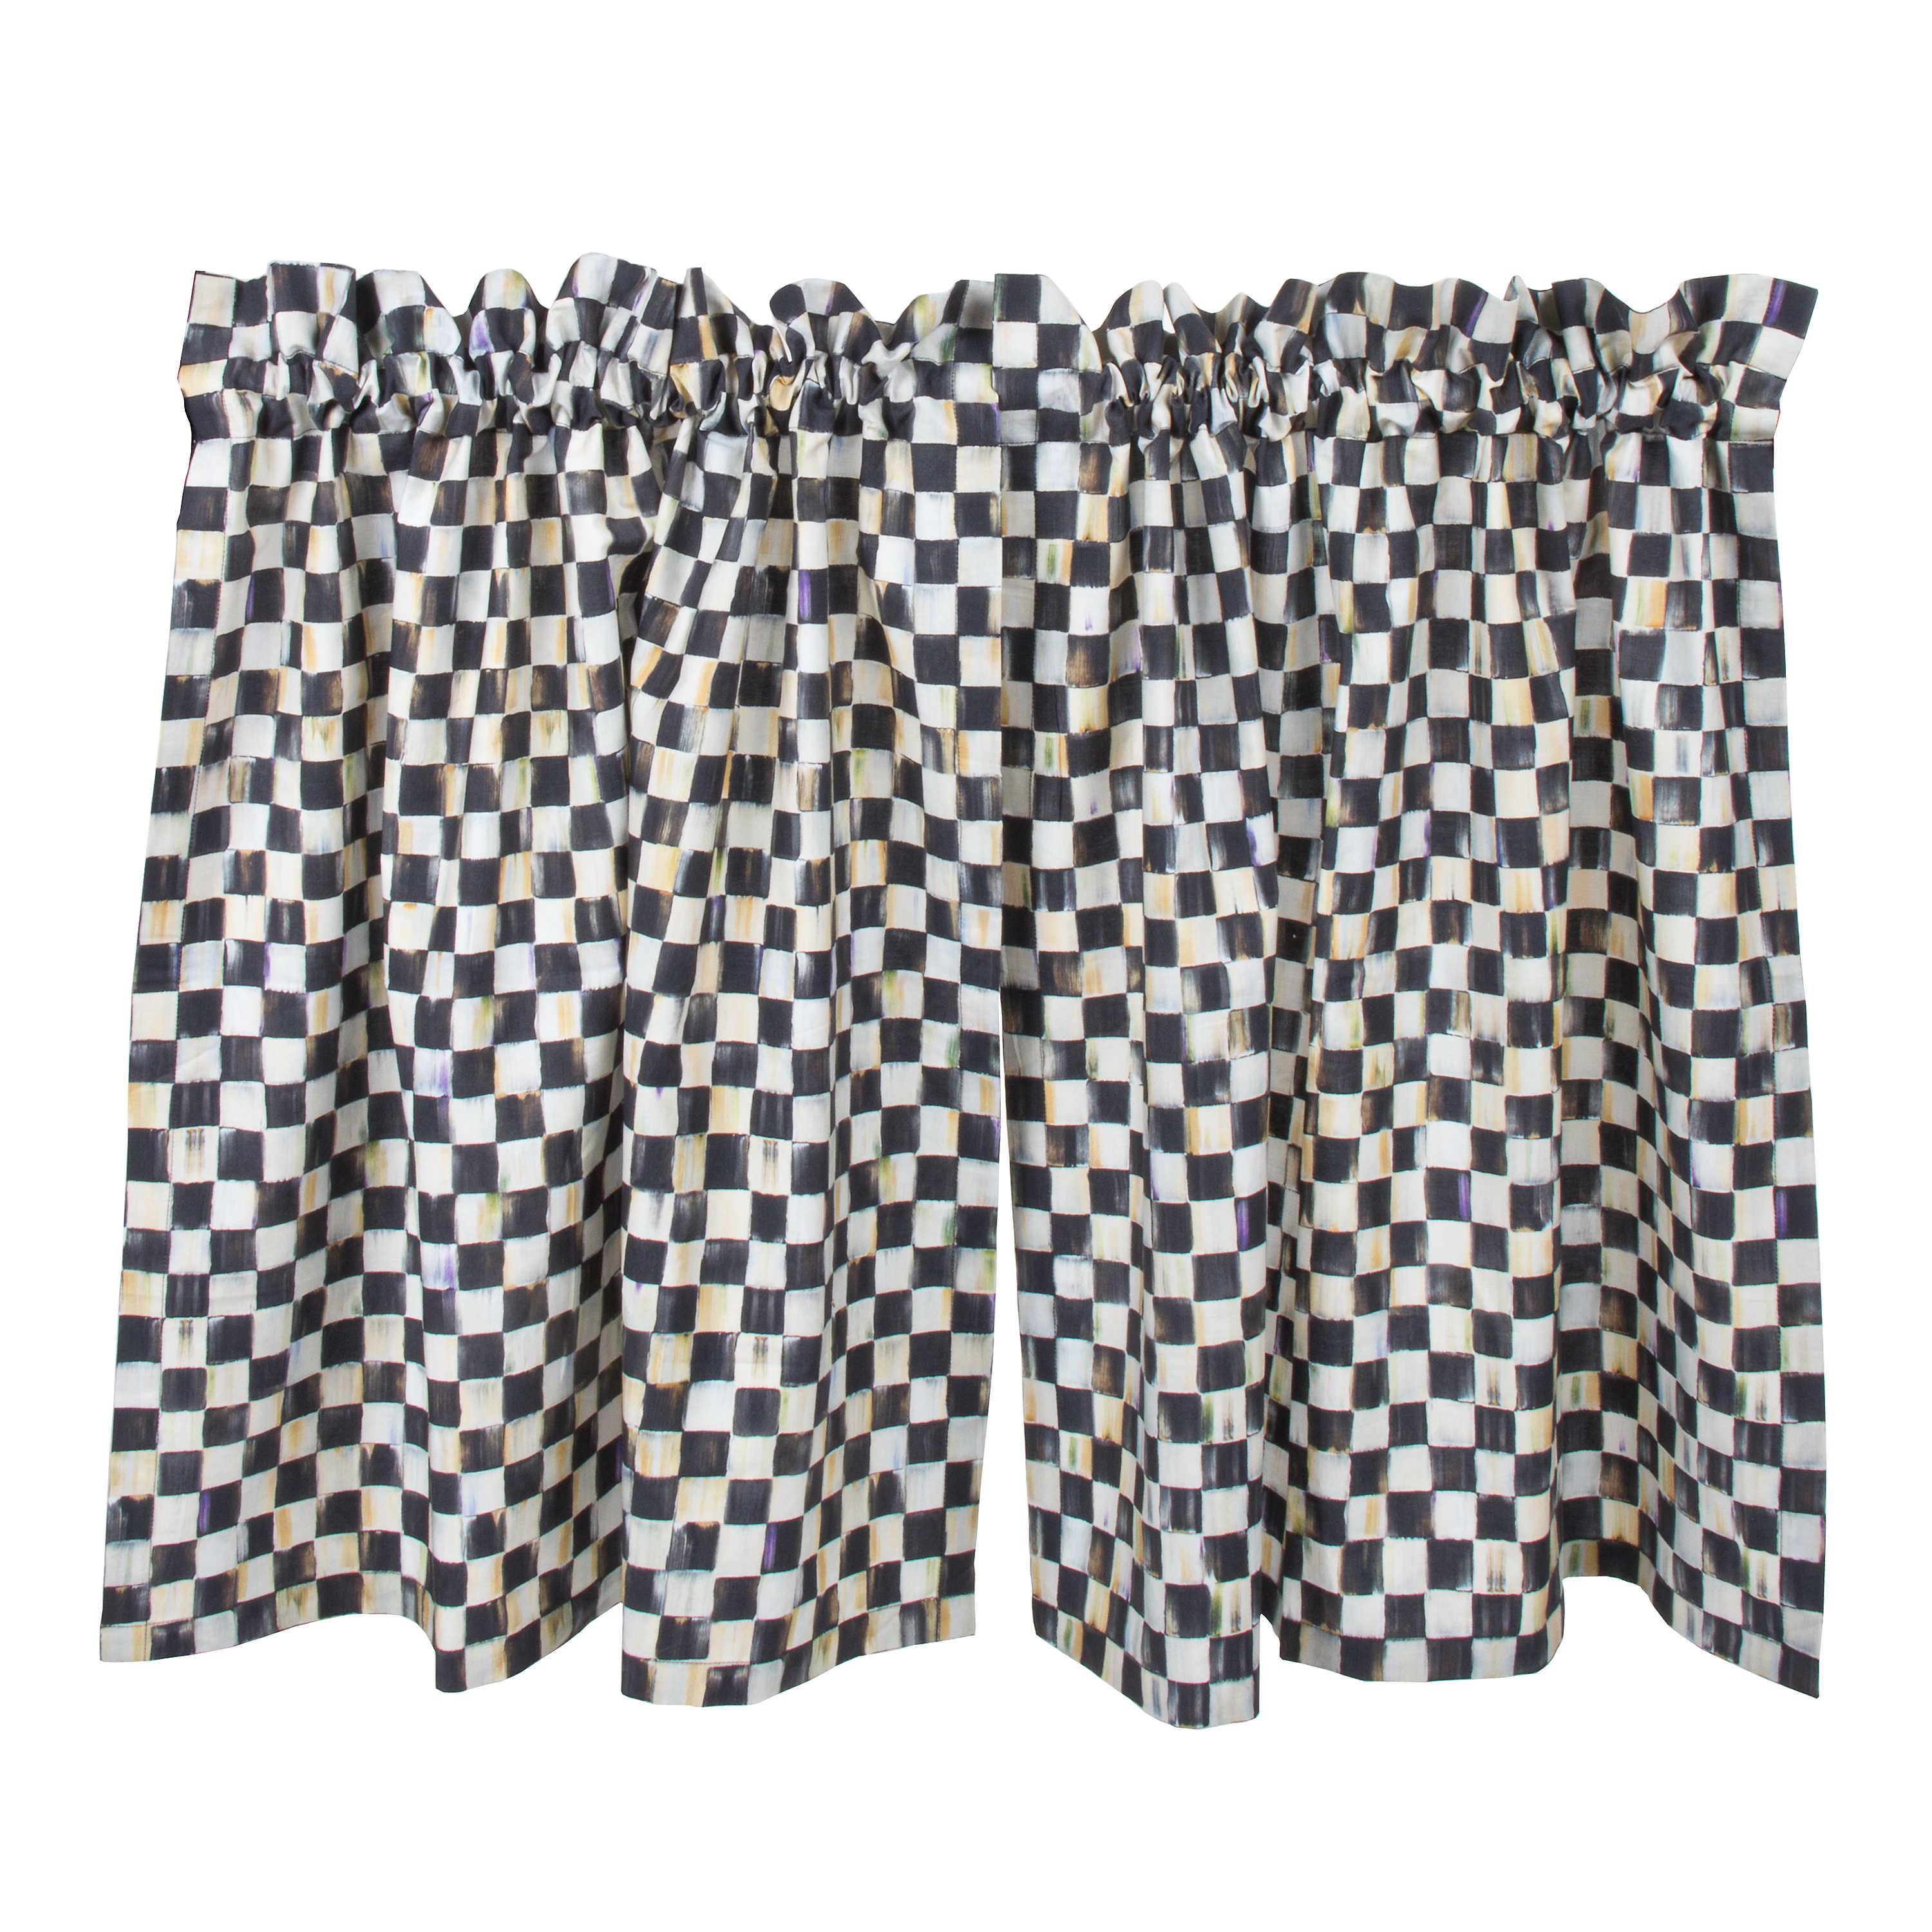 Courtly Check Cafe Curtains, Set of 2 mackenzie-childs Panama 0